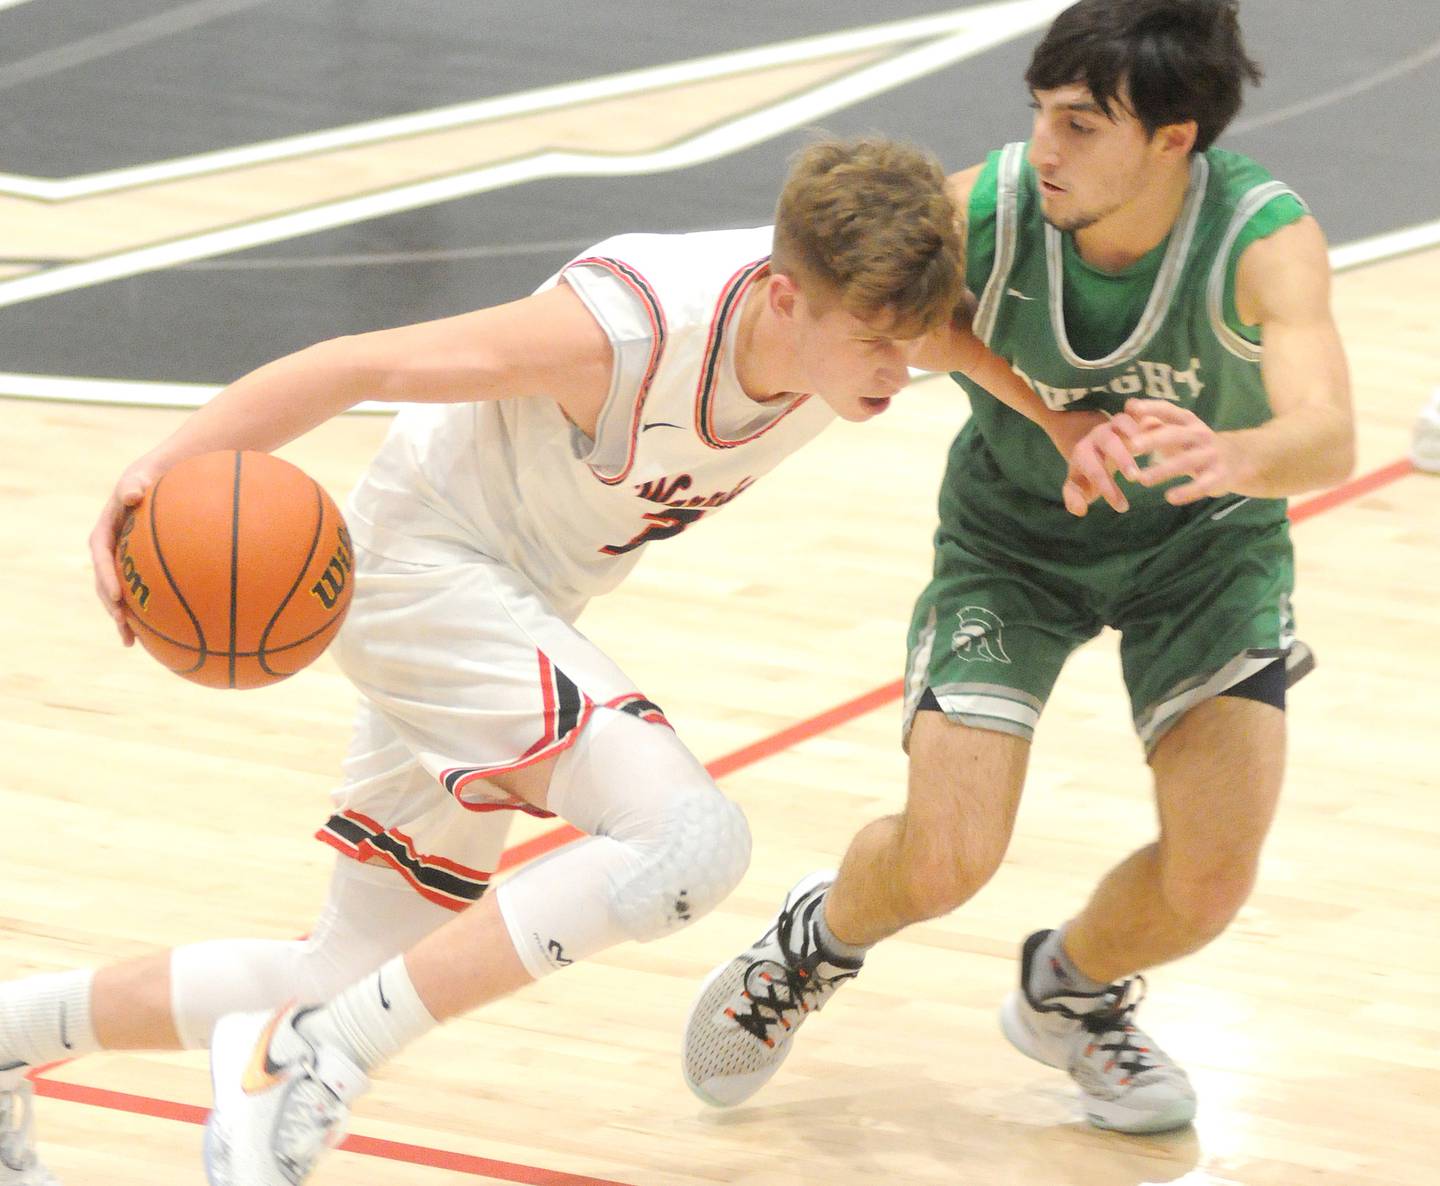 Woodland's Tucker Hill dribbles past Dwight's Jack Duffy at the Warrior Dome on Friday, Jan. 13, 2023.